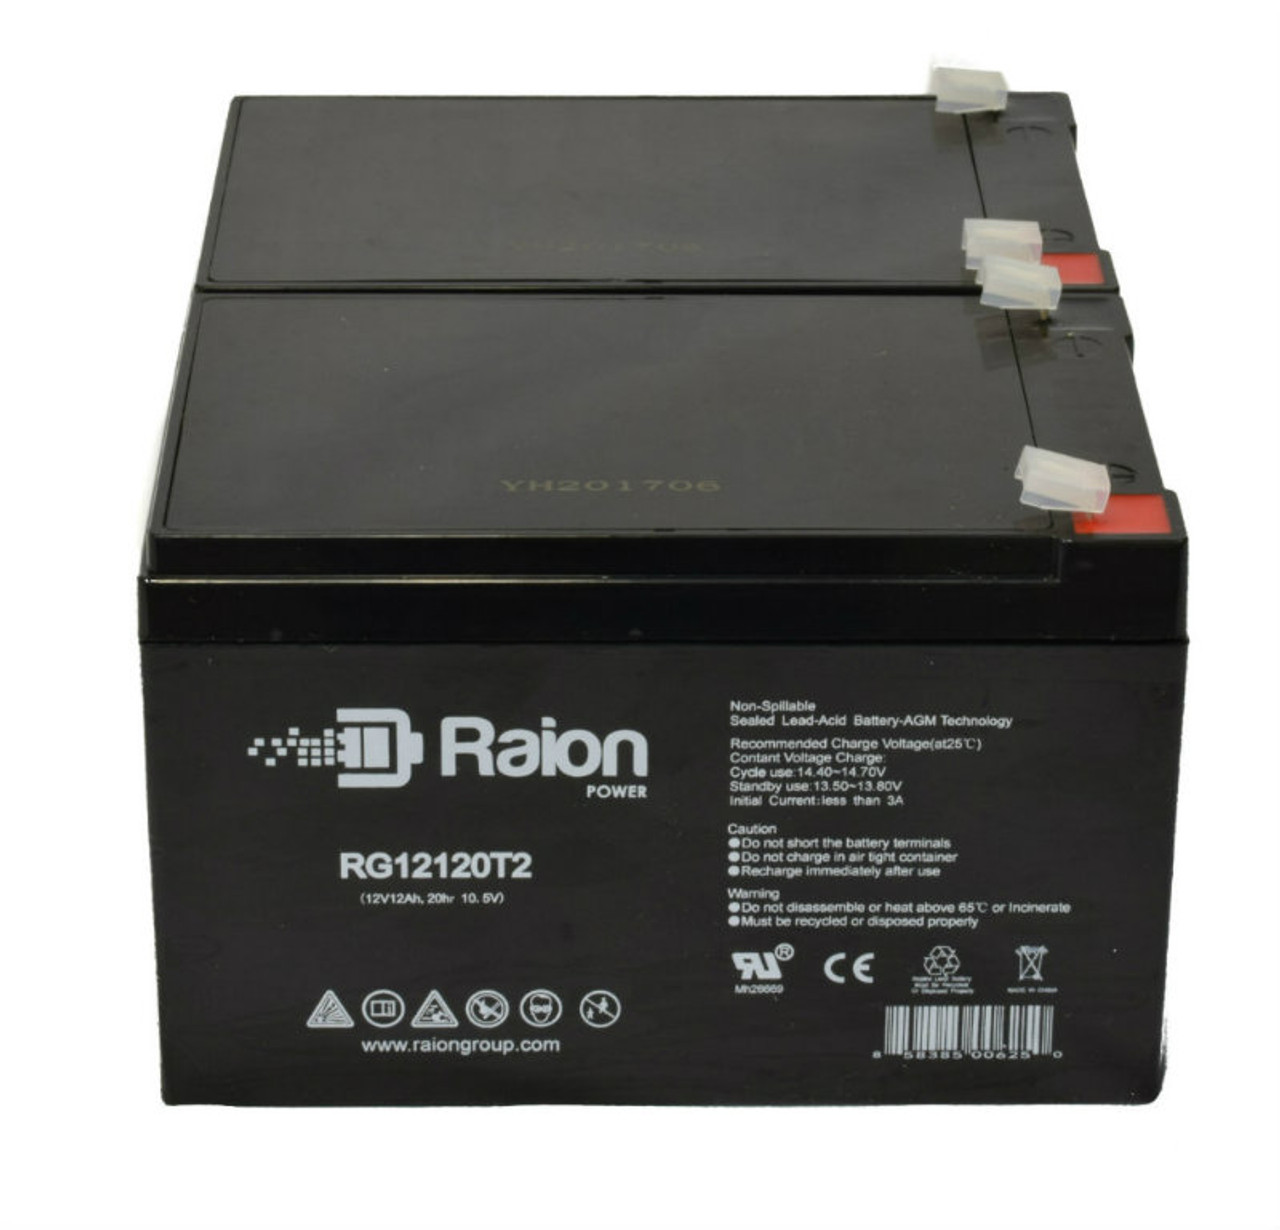 Raion Power 12V 12Ah Non-Spillable Compatible Replacement Battery for Werker WKA12-12F2 - (2 Pack)